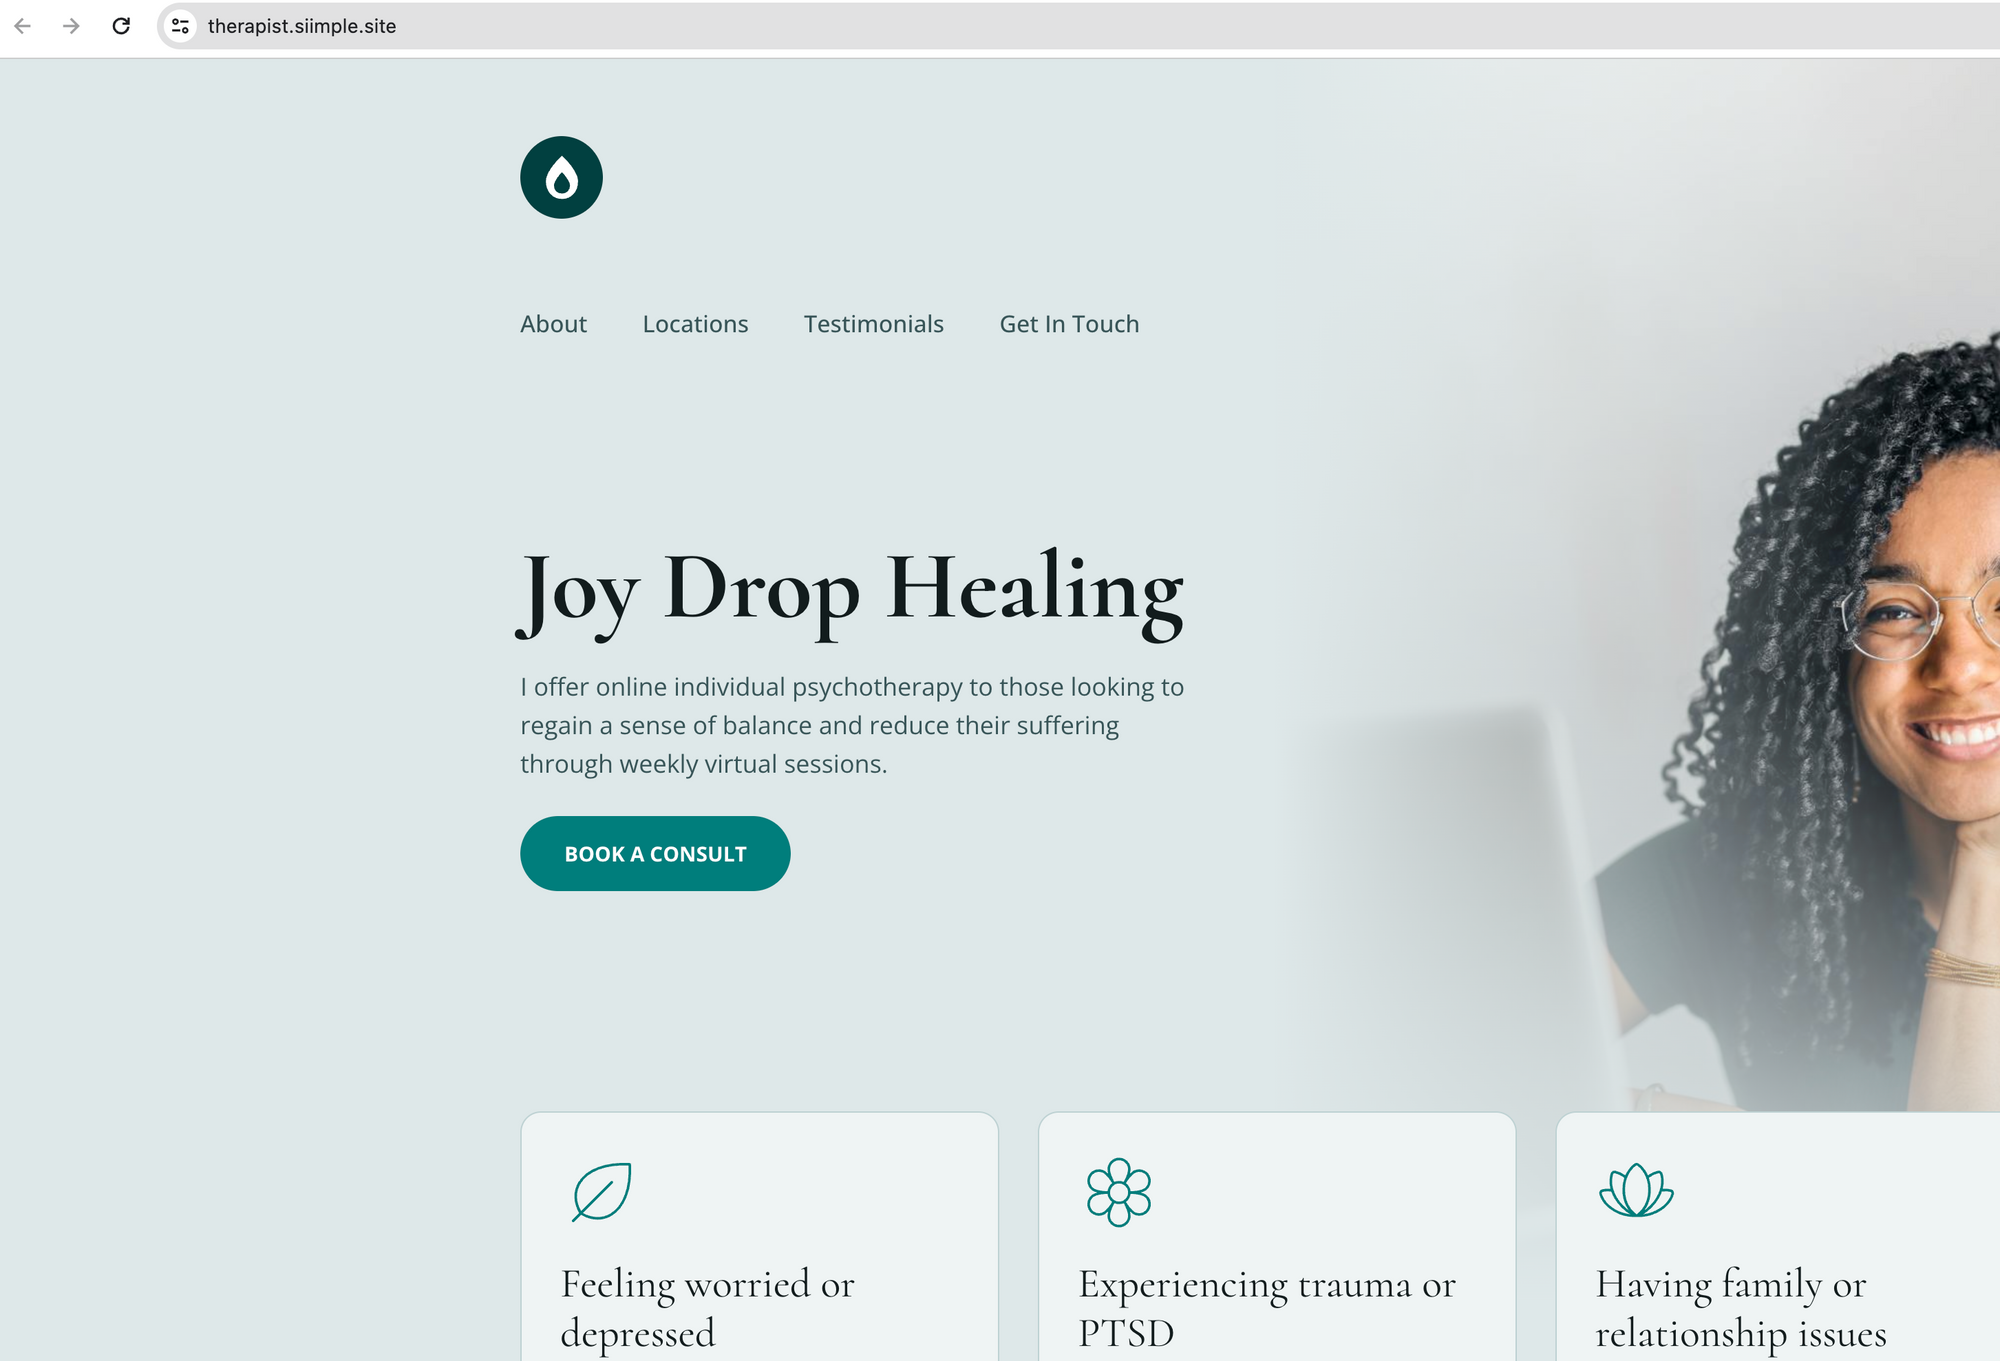 Light green website theme with Black women therapist image on the right